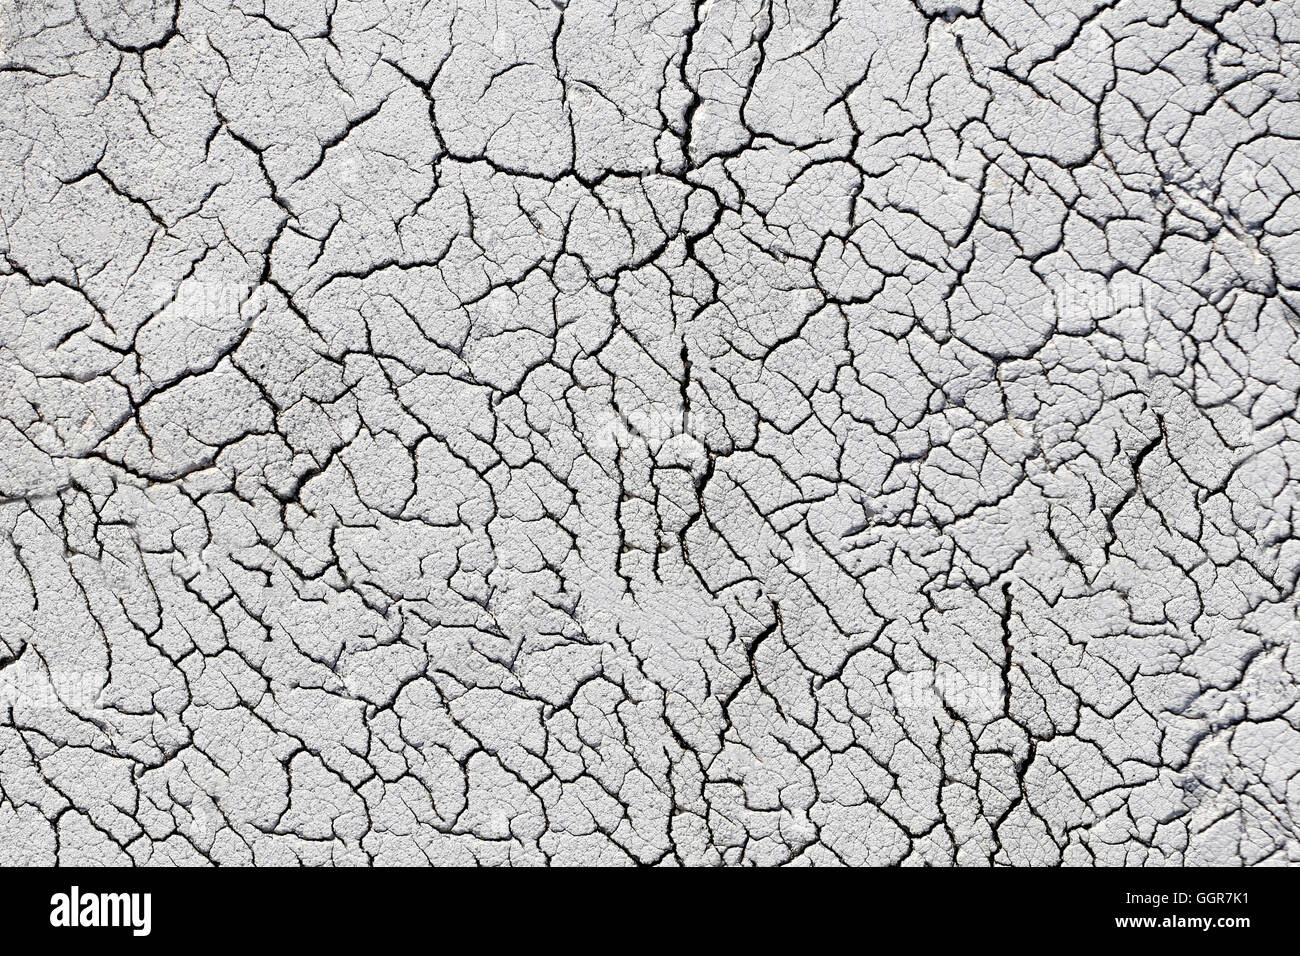 Old asphalt road surface of Texture with cracked for design background. Stock Photo